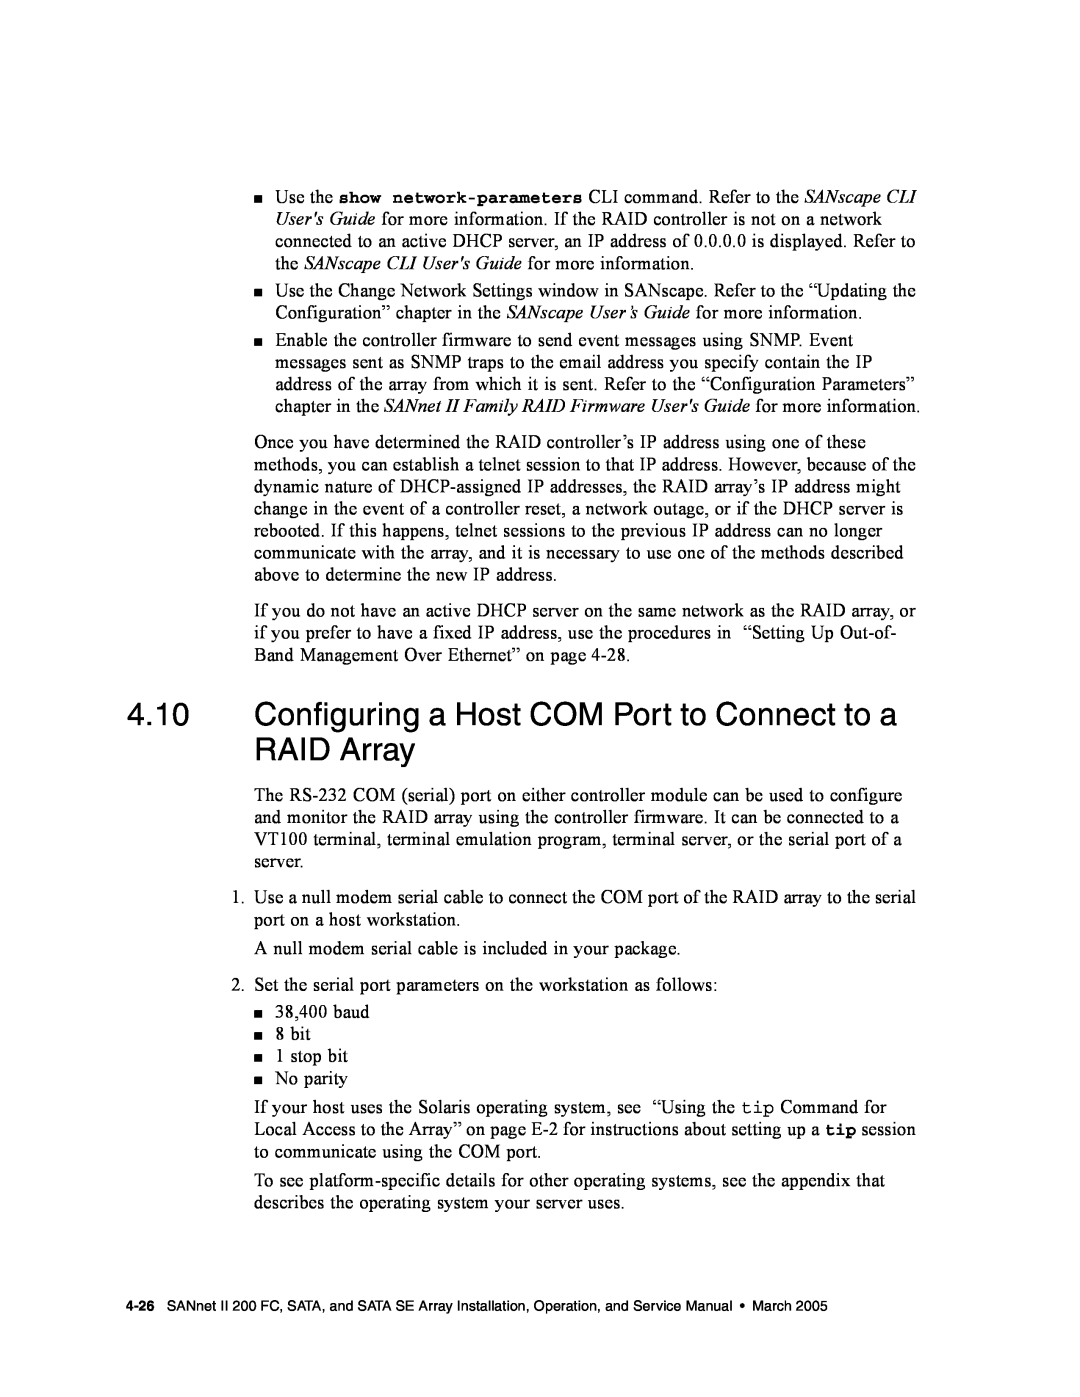 Dot Hill Systems II 200 FC service manual Configuring a Host COM Port to Connect to a RAID Array 